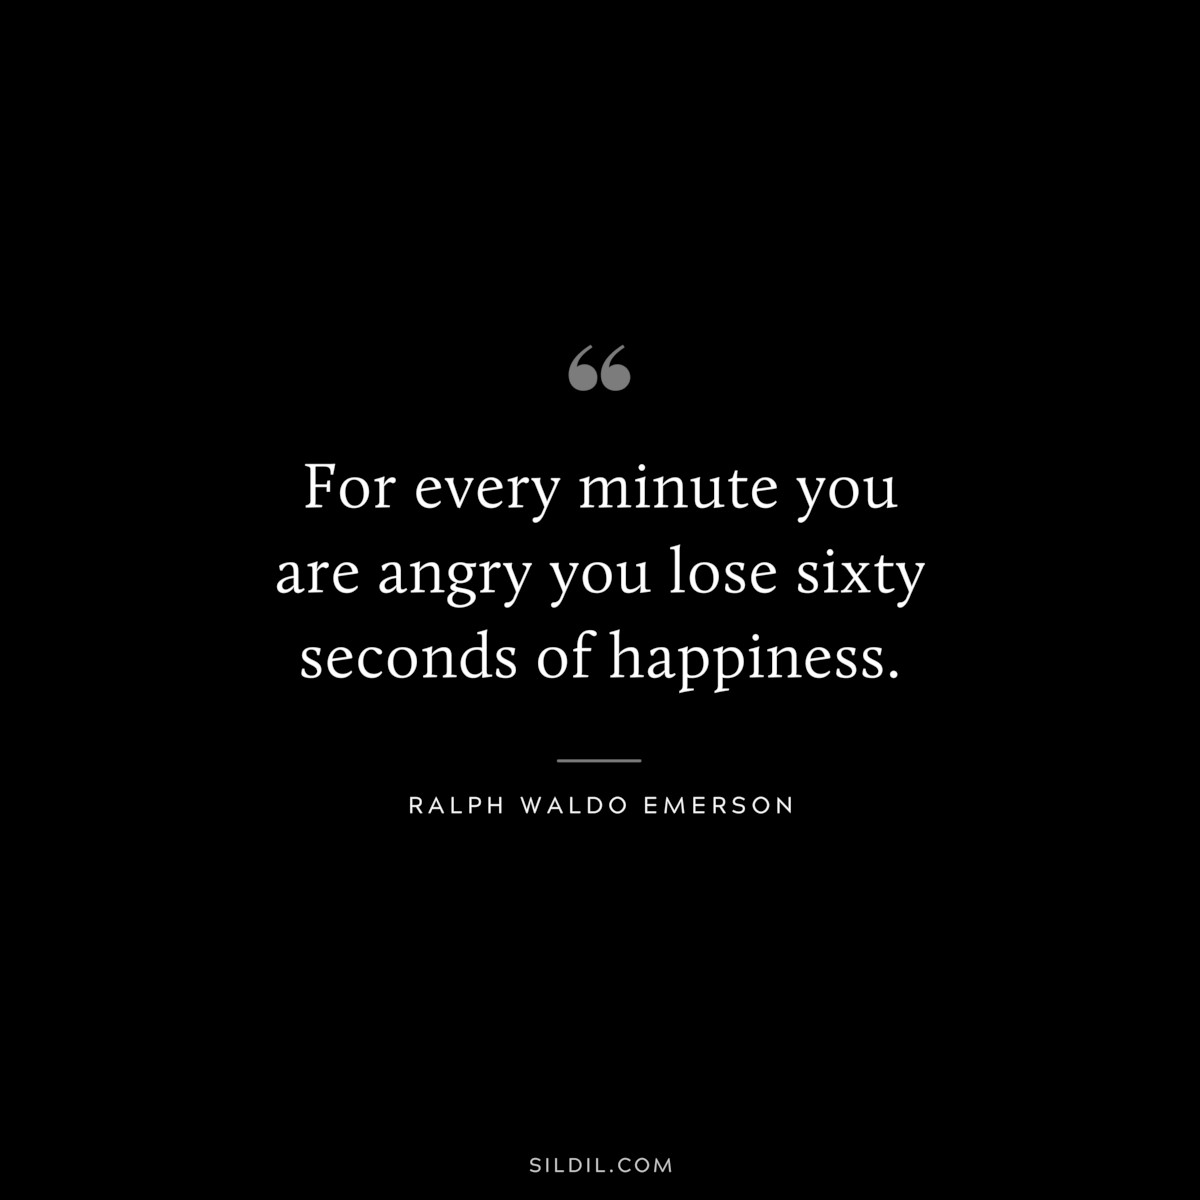 For every minute you are angry you lose sixty seconds of happiness. — Ralph Waldo Emerson